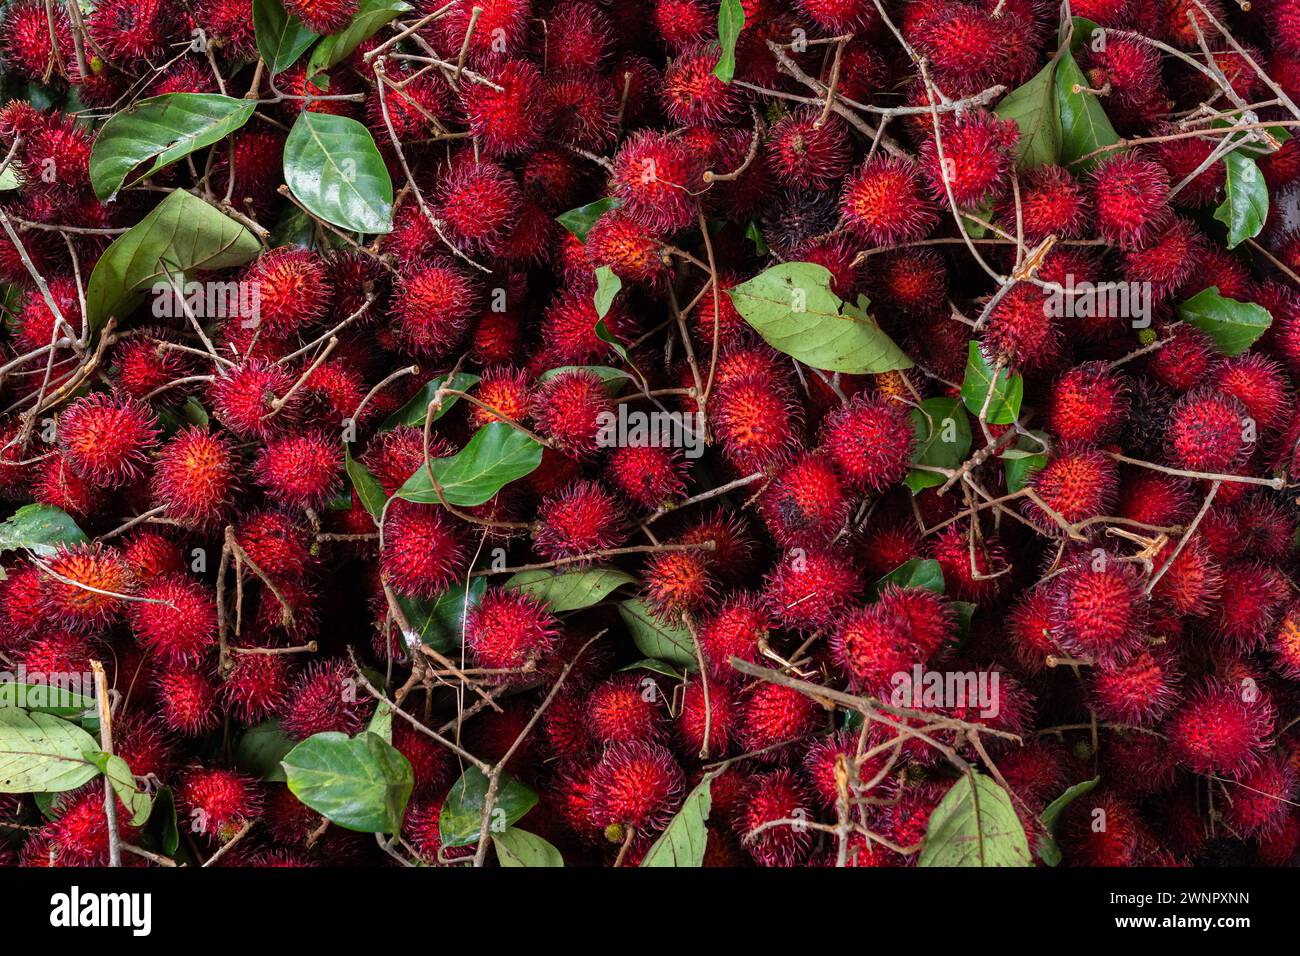 Abundance of fresh red rambutans with leaf for sale in the Indonesian market. Stock Photo